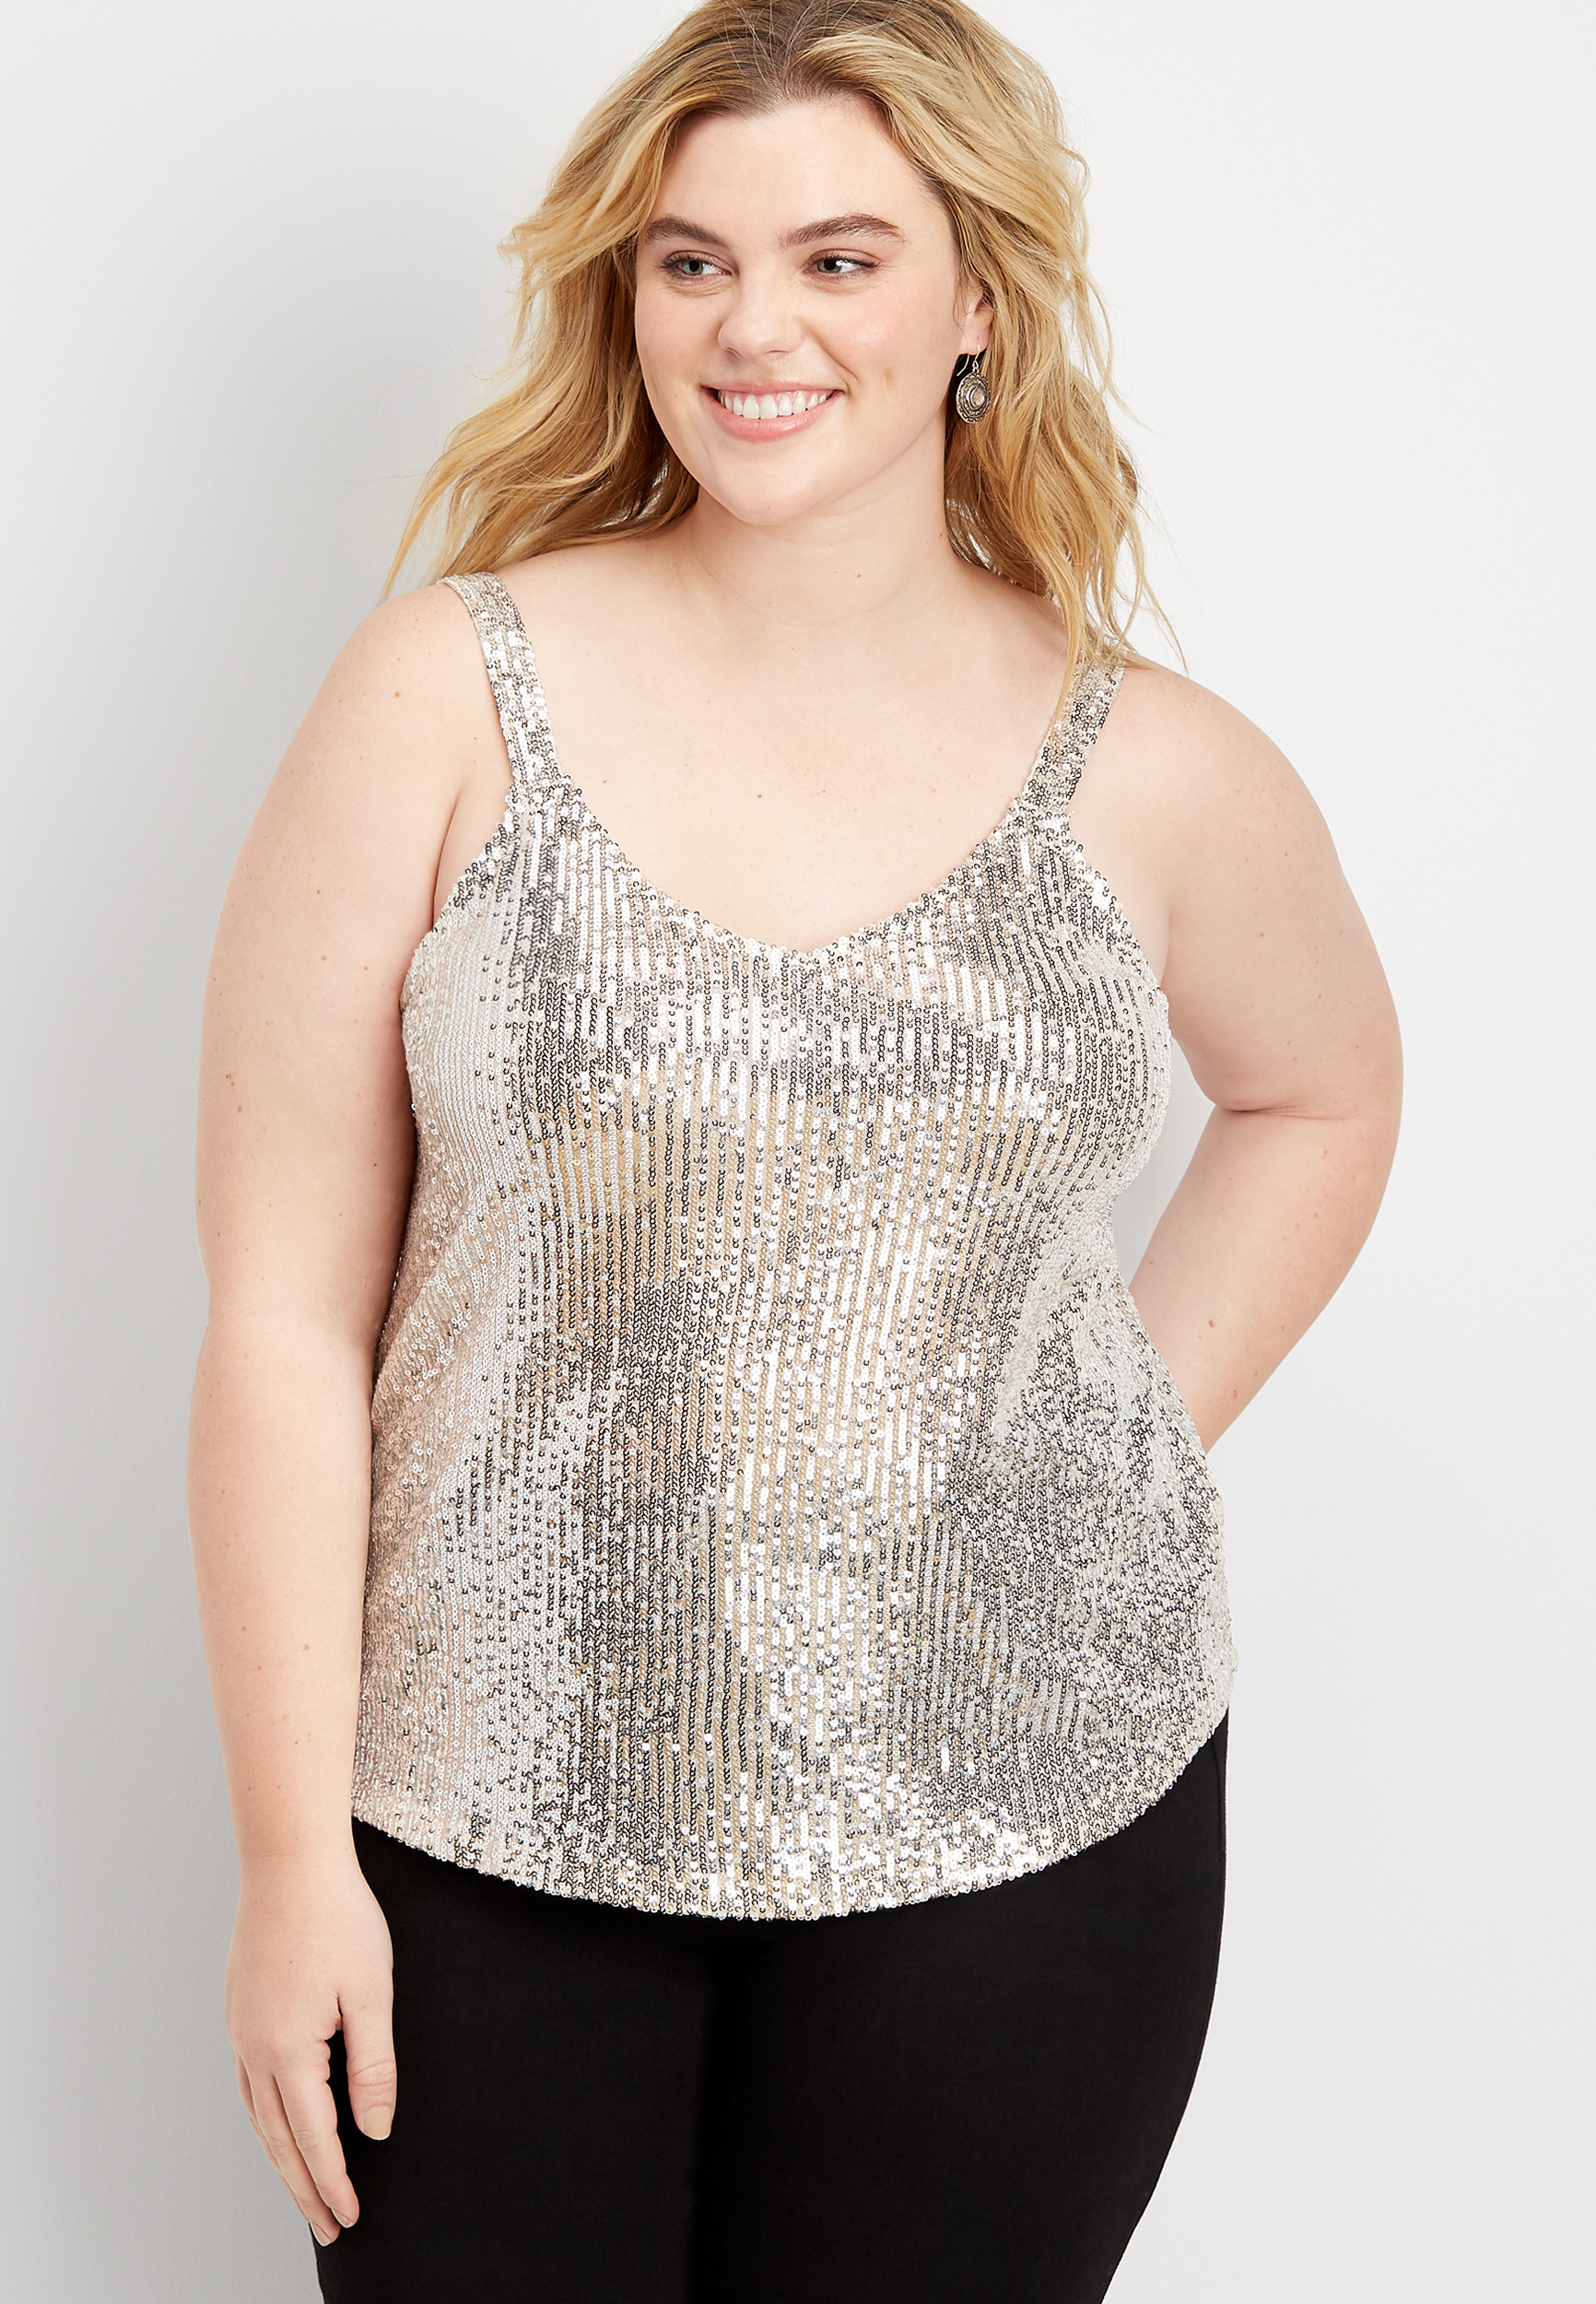 Plus Size Tanks & Camisoles For Women | maurices